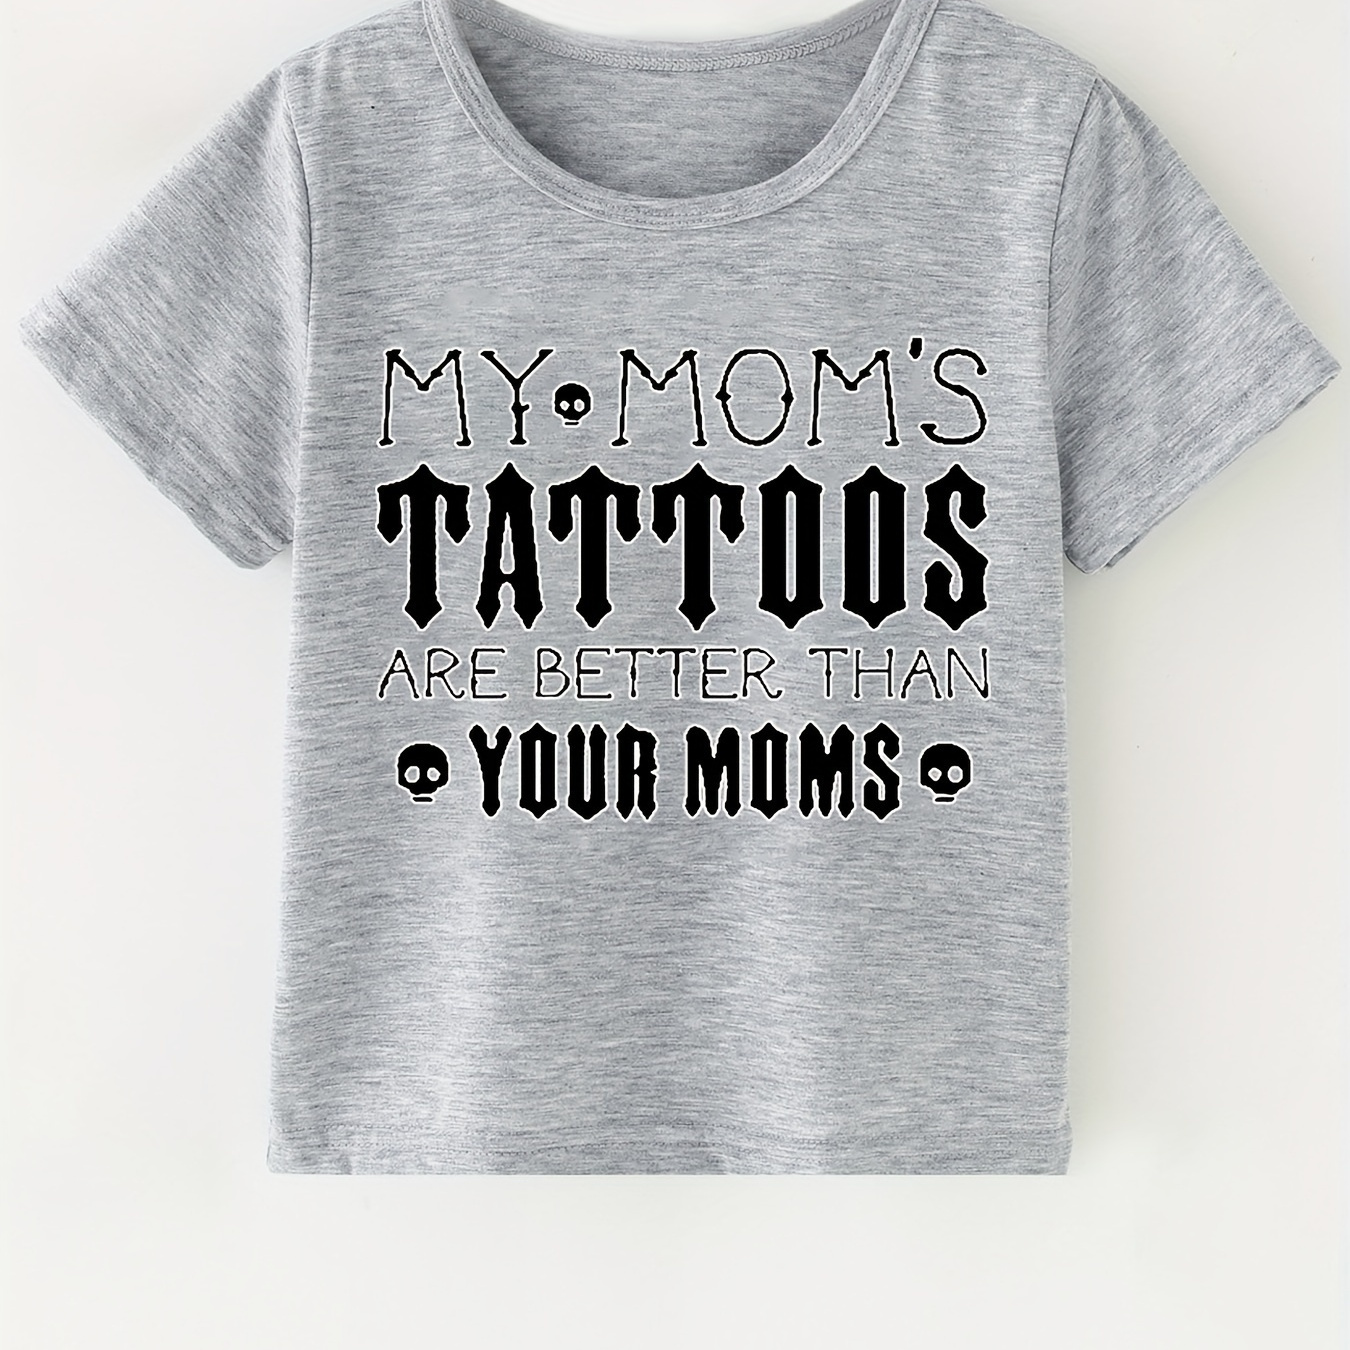 

My Mom's Tattoos Are Better Than Your Moms Letter Print Boys Creative T-shirt, Casual Lightweight Comfy Short Sleeve Tee Tops, Kids Clothings For Summer